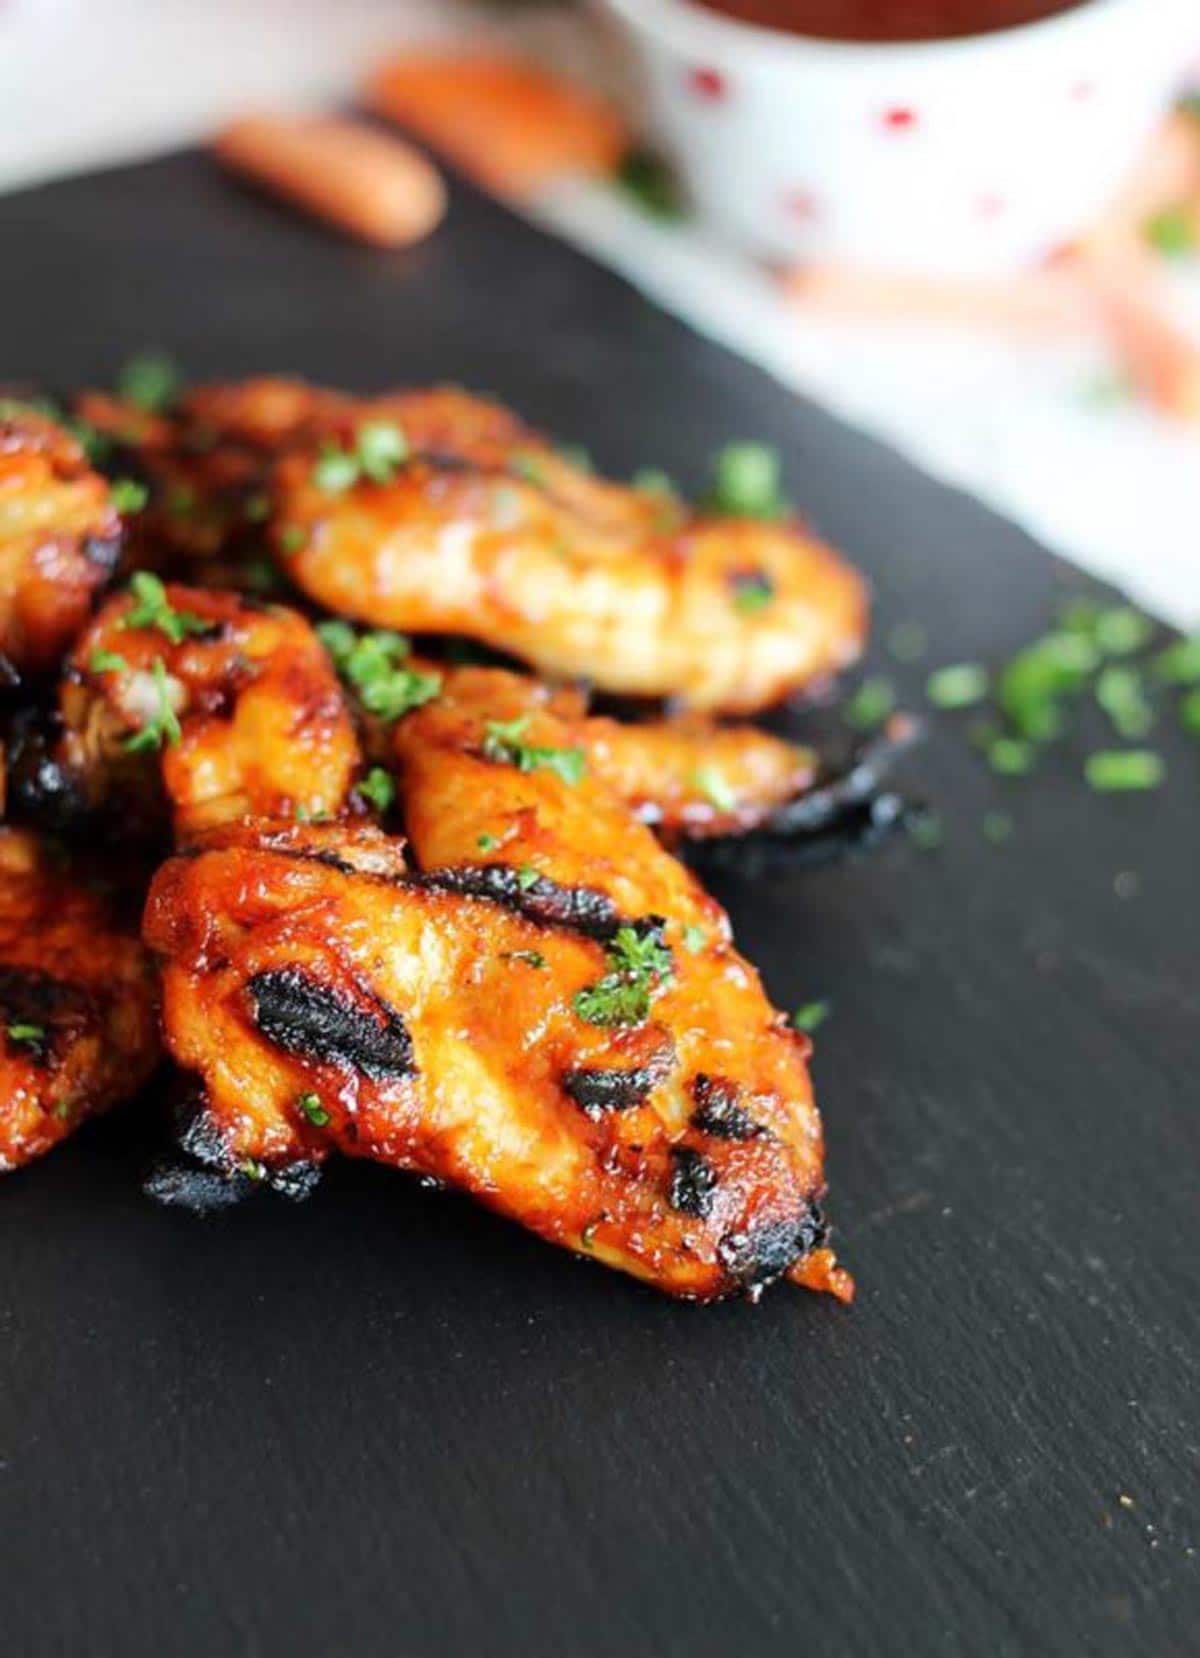 Slate plate featuring 4 grilled chicken wings topped with parsley, BBQ sauce and carrots in the background.